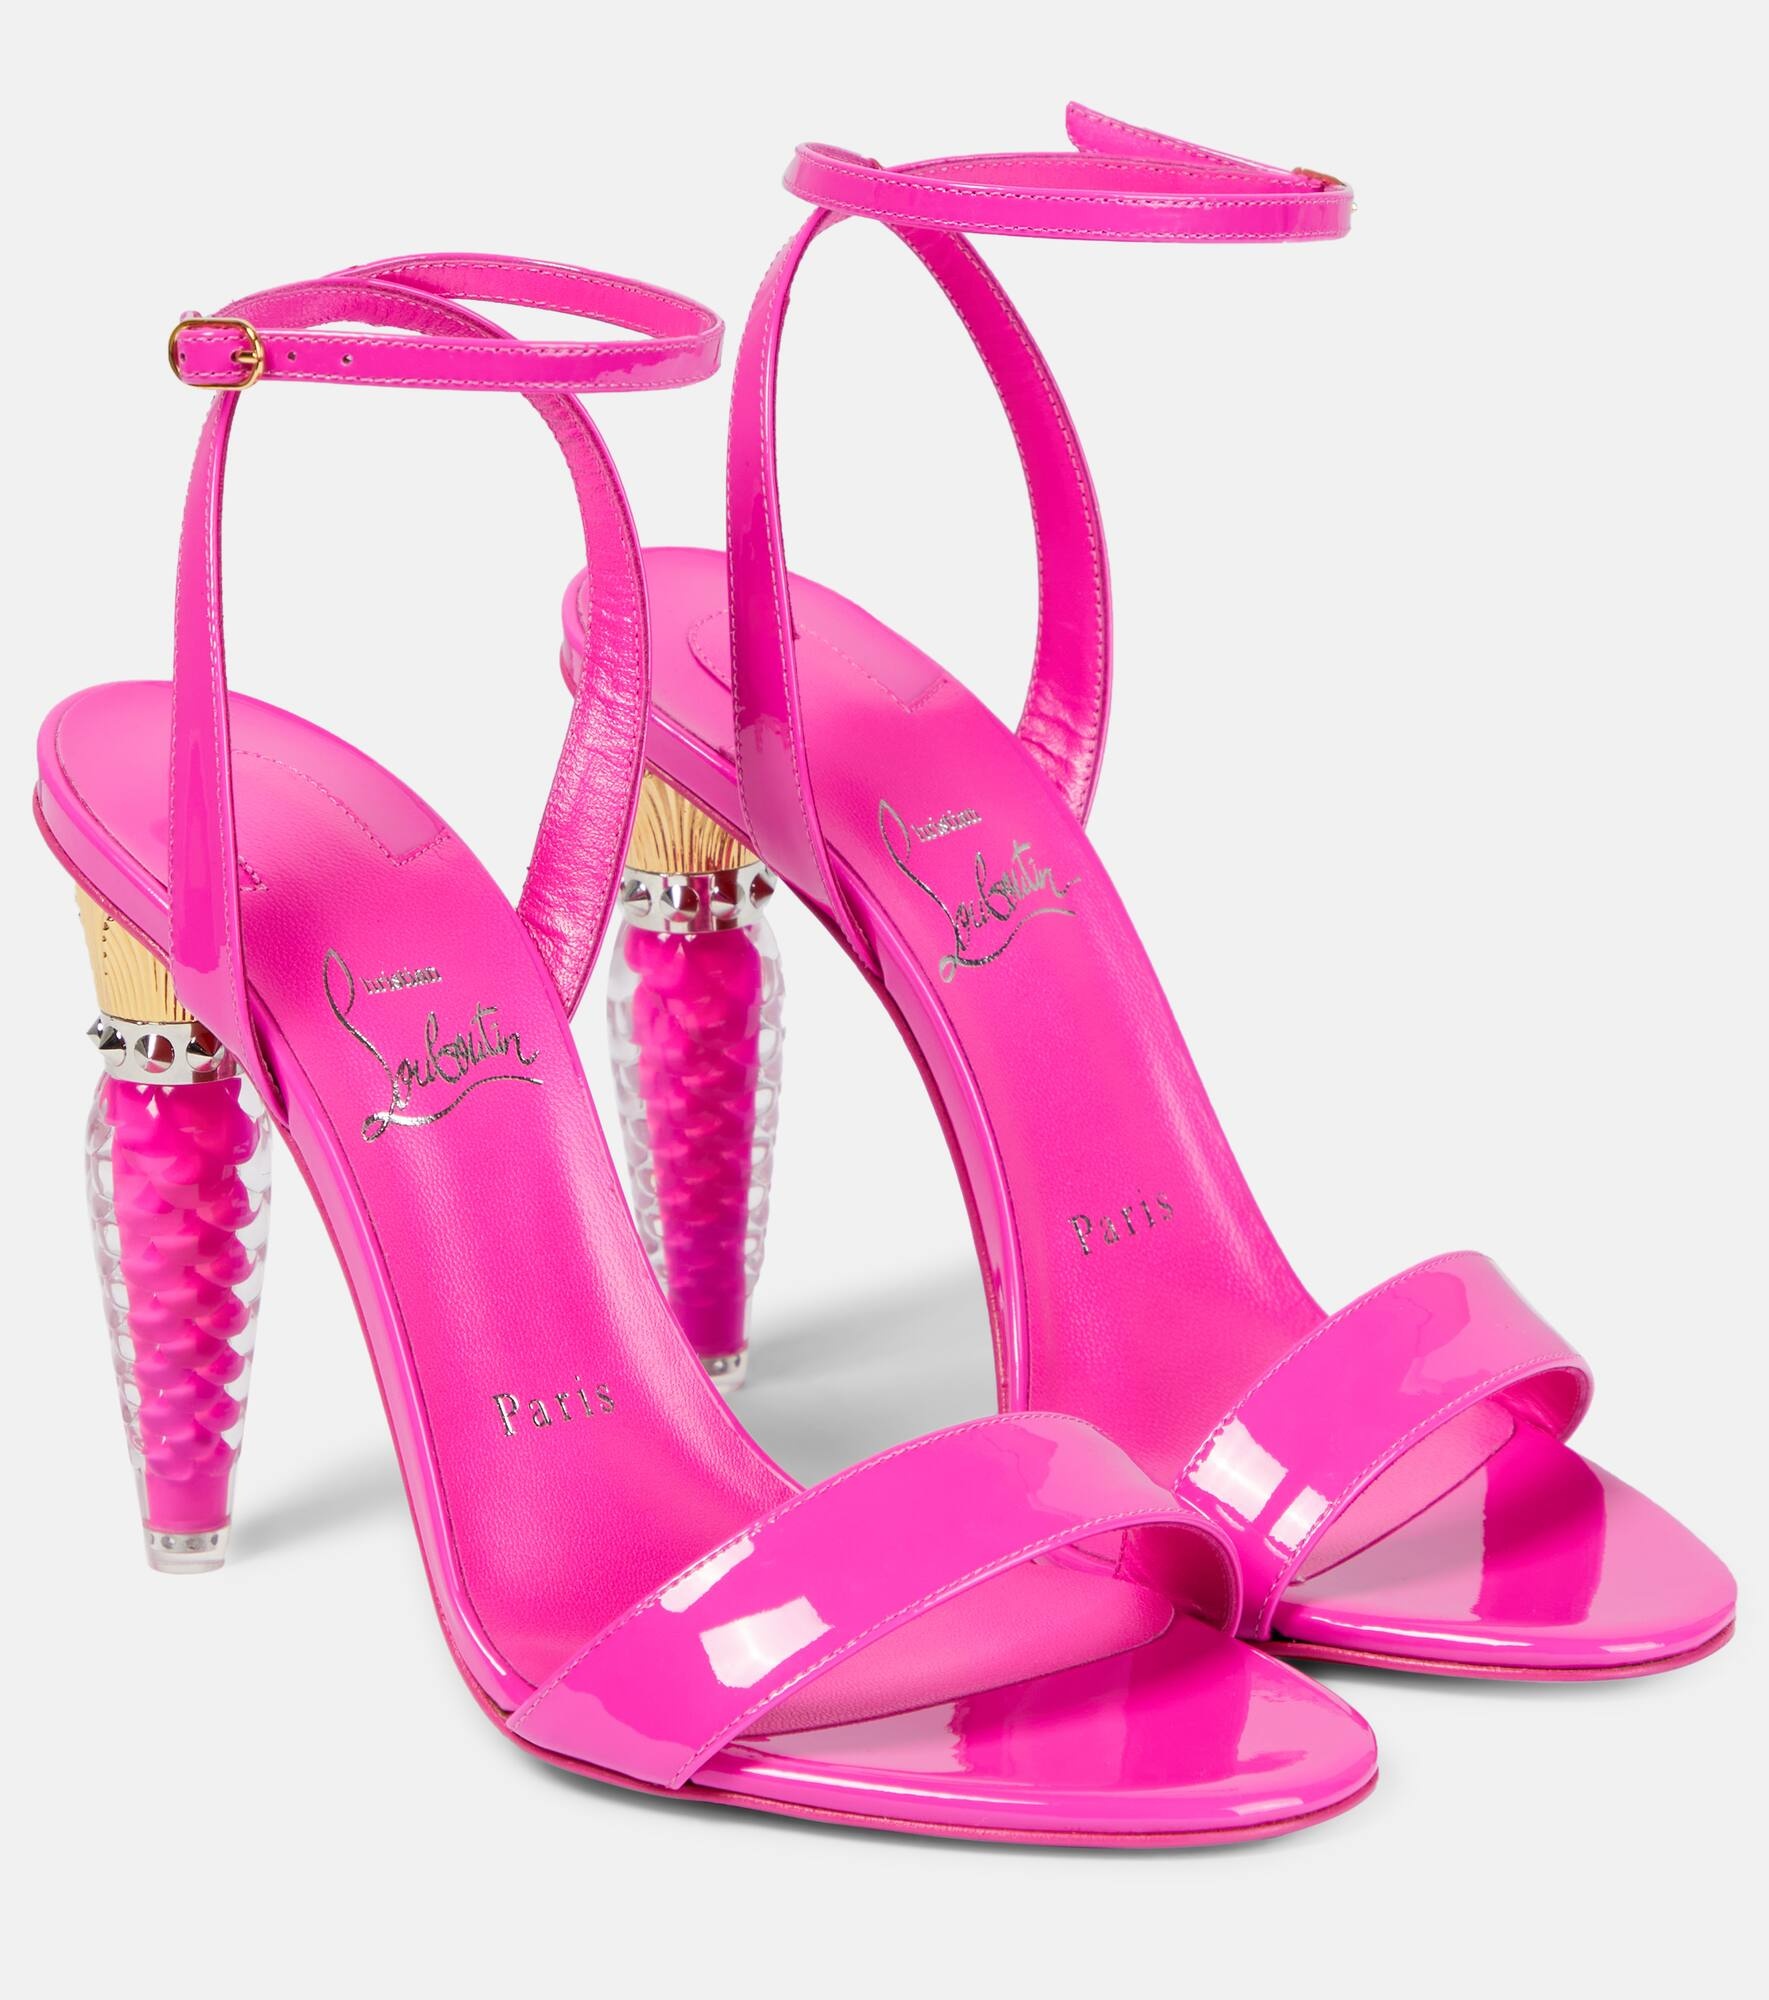 Lipgloss Queen patent leather sandals - 1